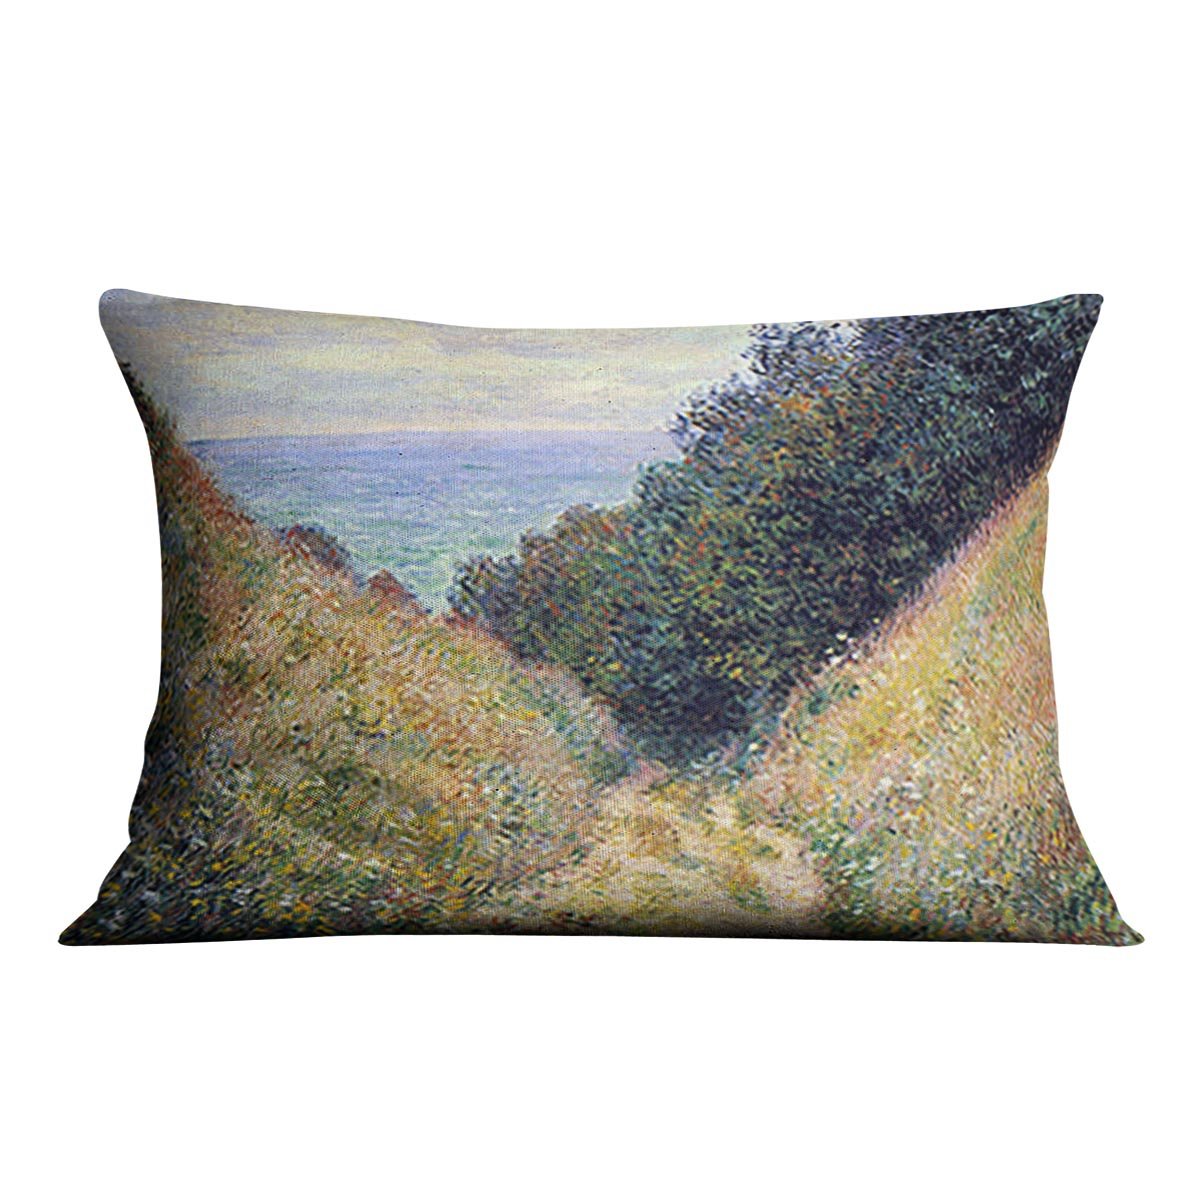 Pourville 1 by Monet Throw Pillow